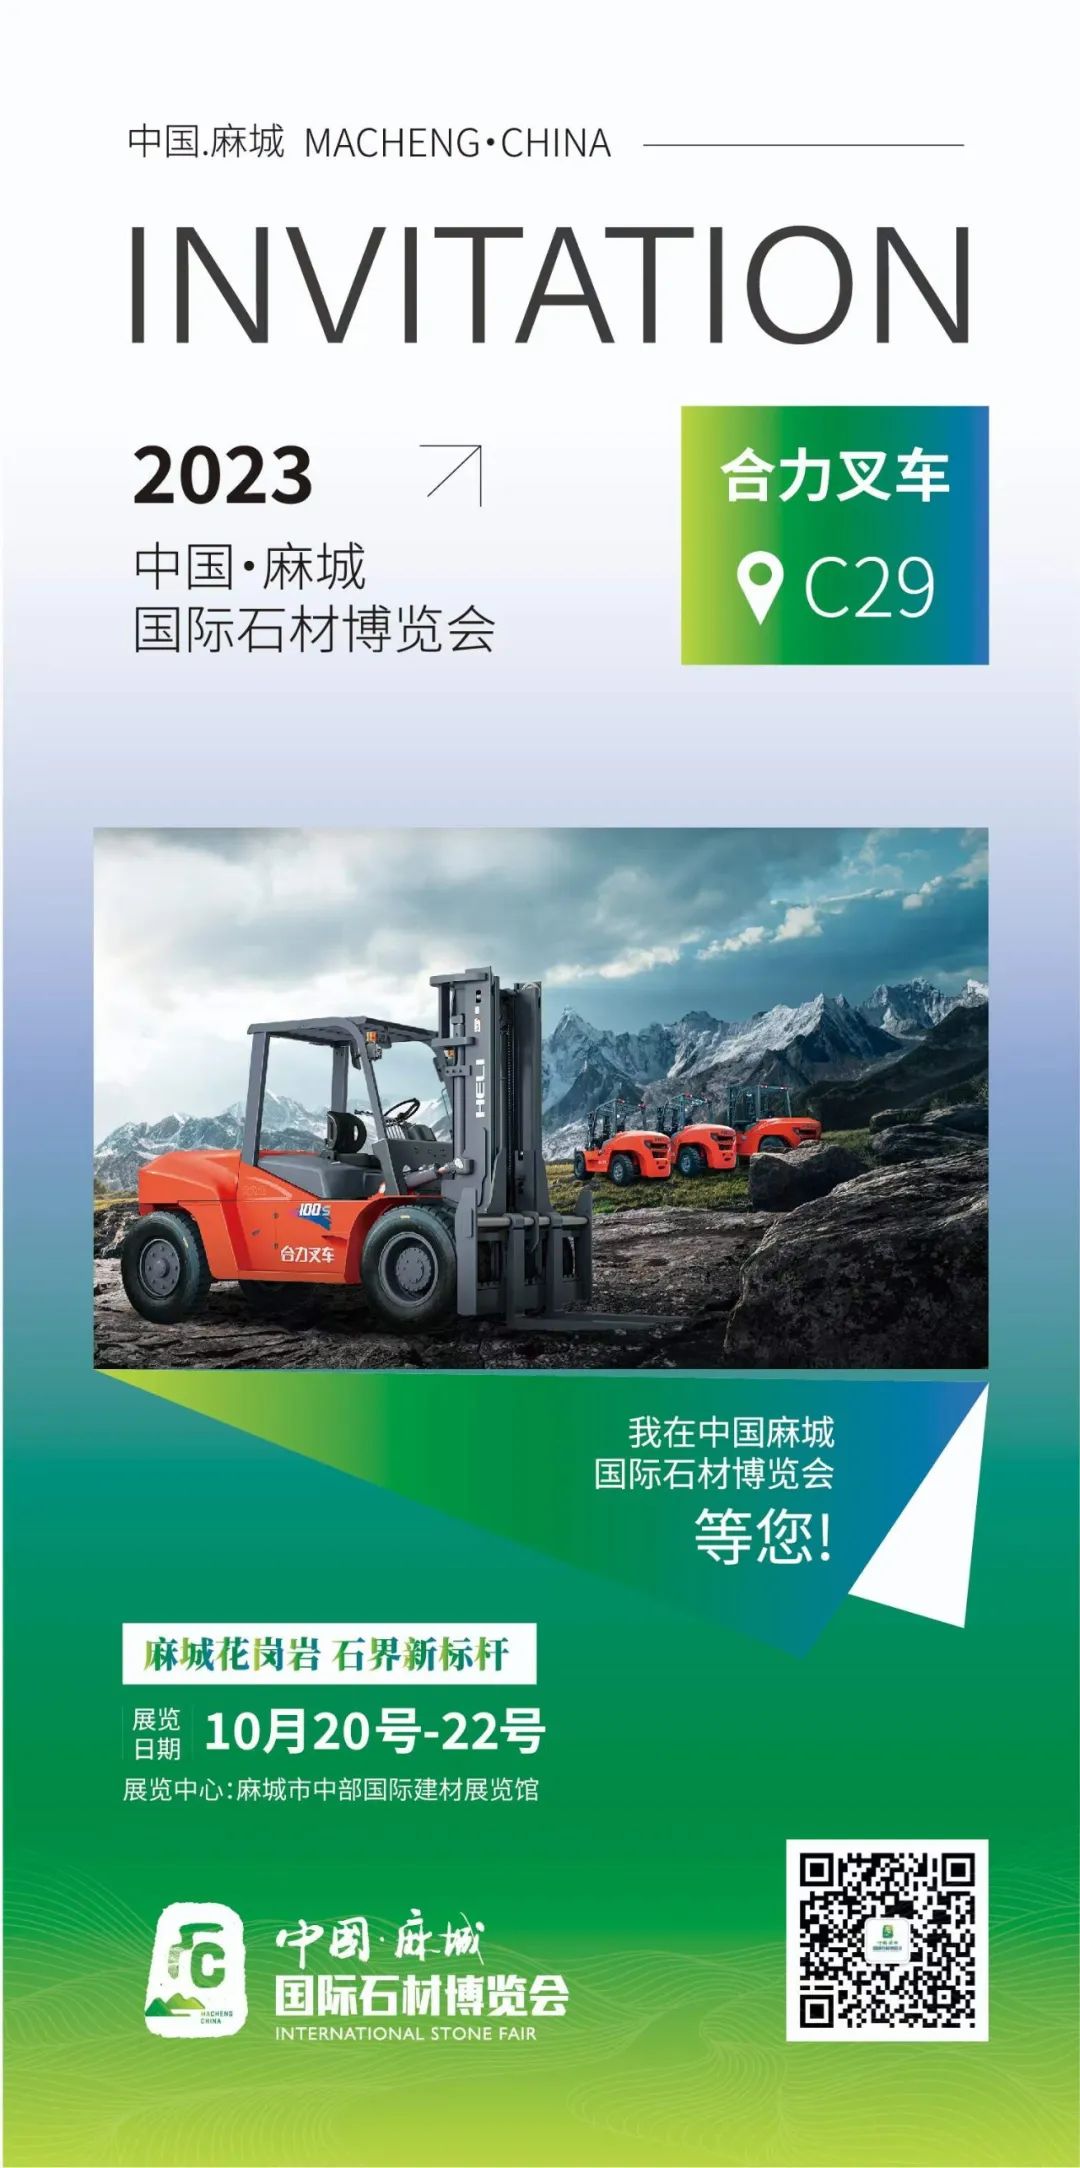 The first China Macheng International Stone Expo is waiting for you at booth C29!